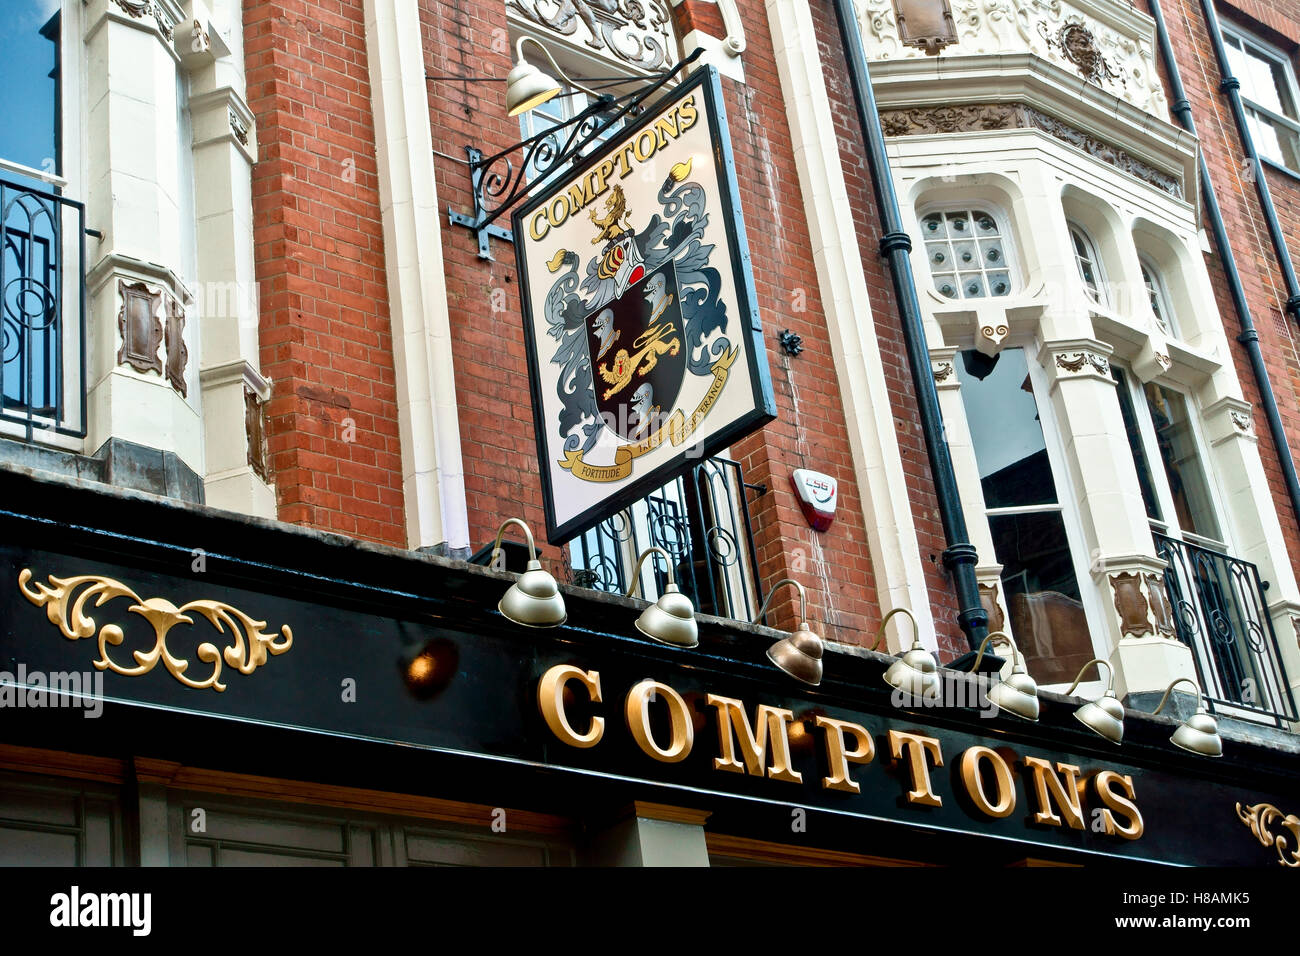 Comptons pub, gay pub, Old Compton Street, situated in the heart of Soho's Gay village, London, England, Great Britain, United Kingdom, UK, Europe. Stock Photo